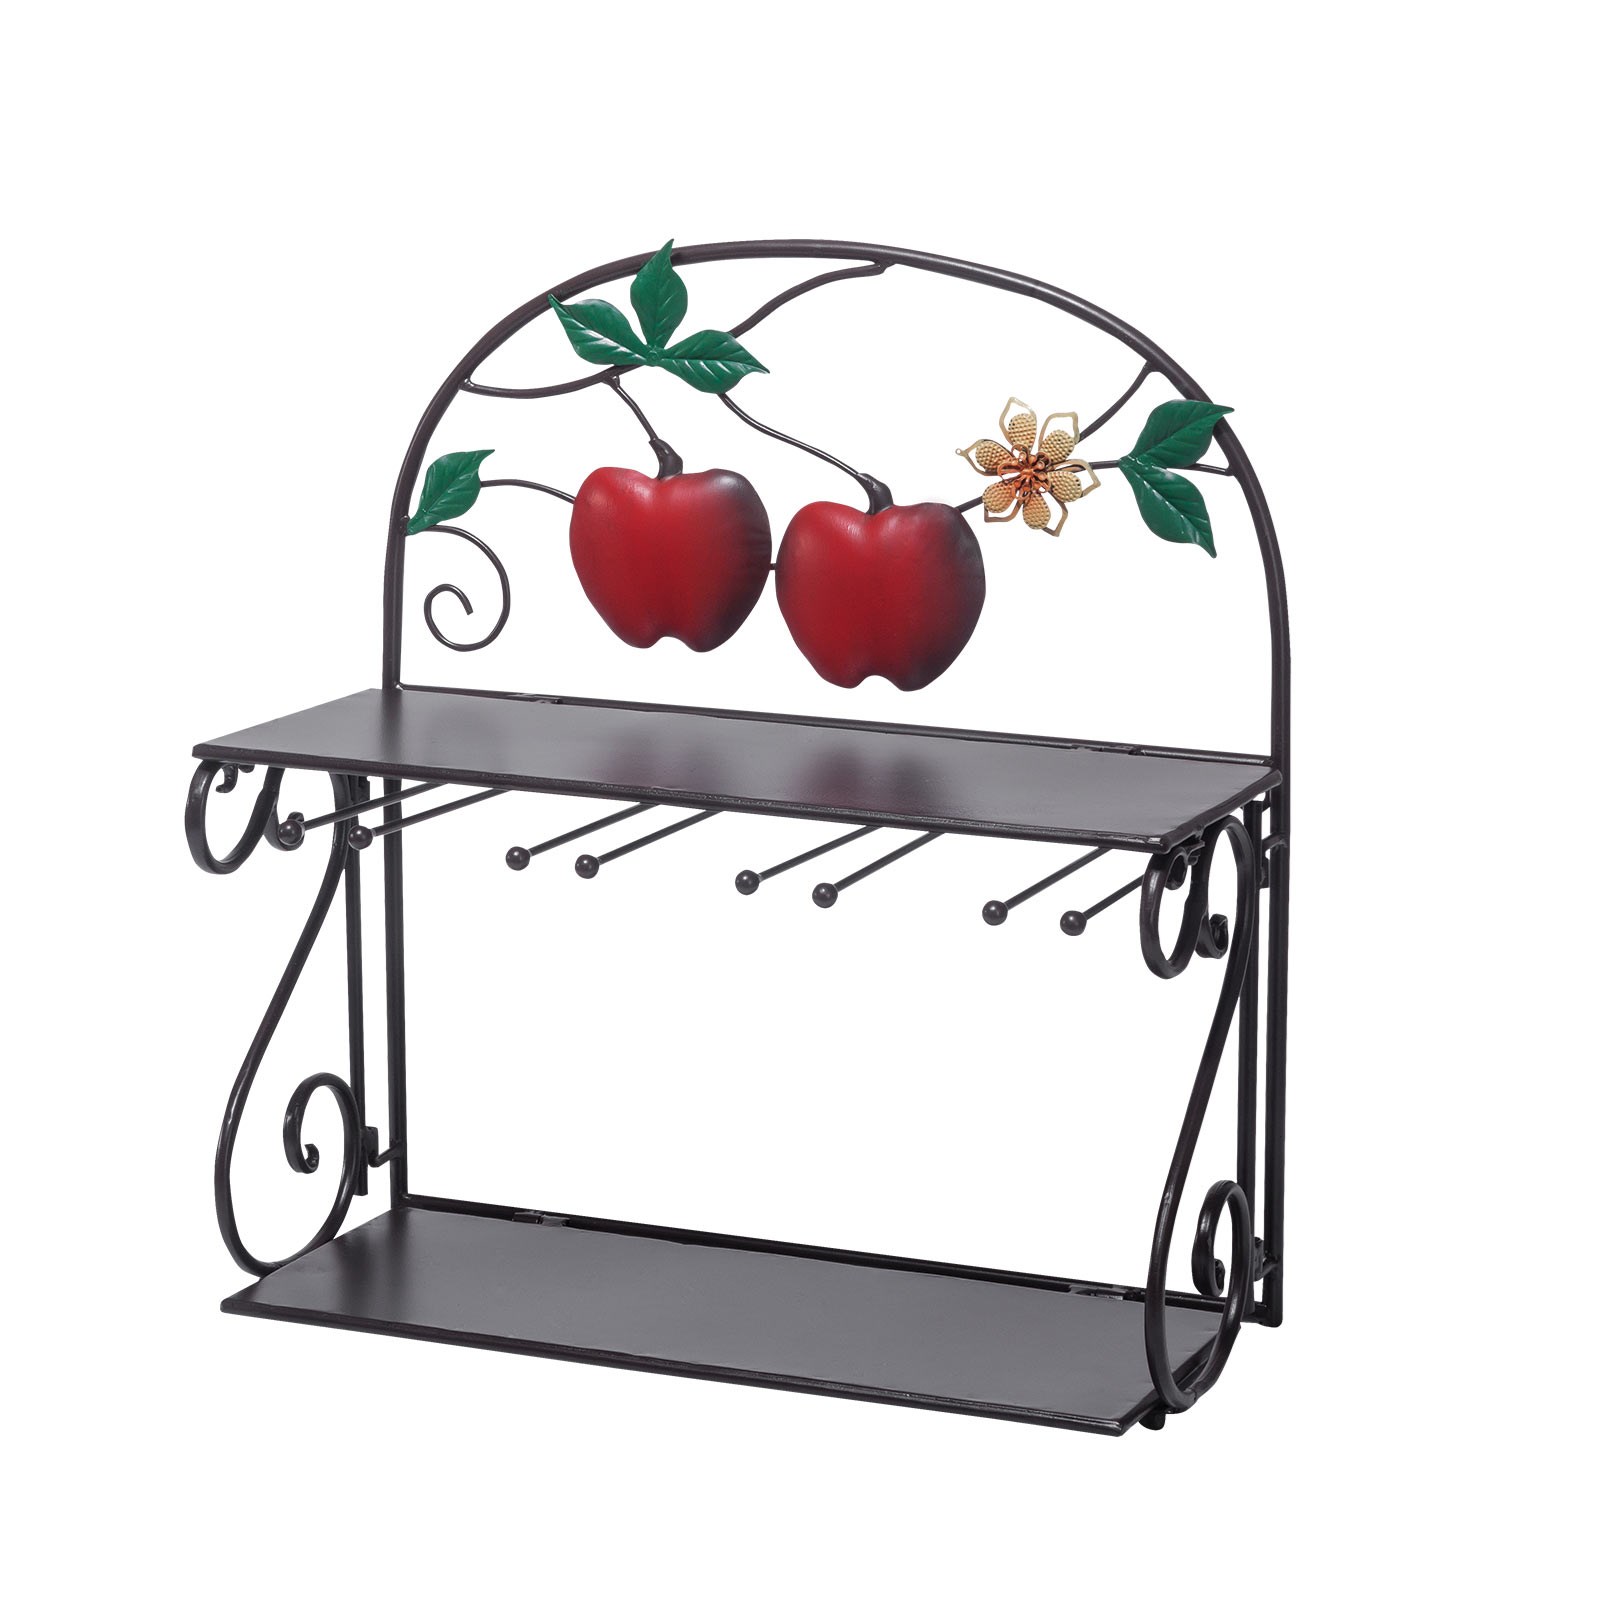 21059 Wall Shelf Orchard Apples Home Interiors